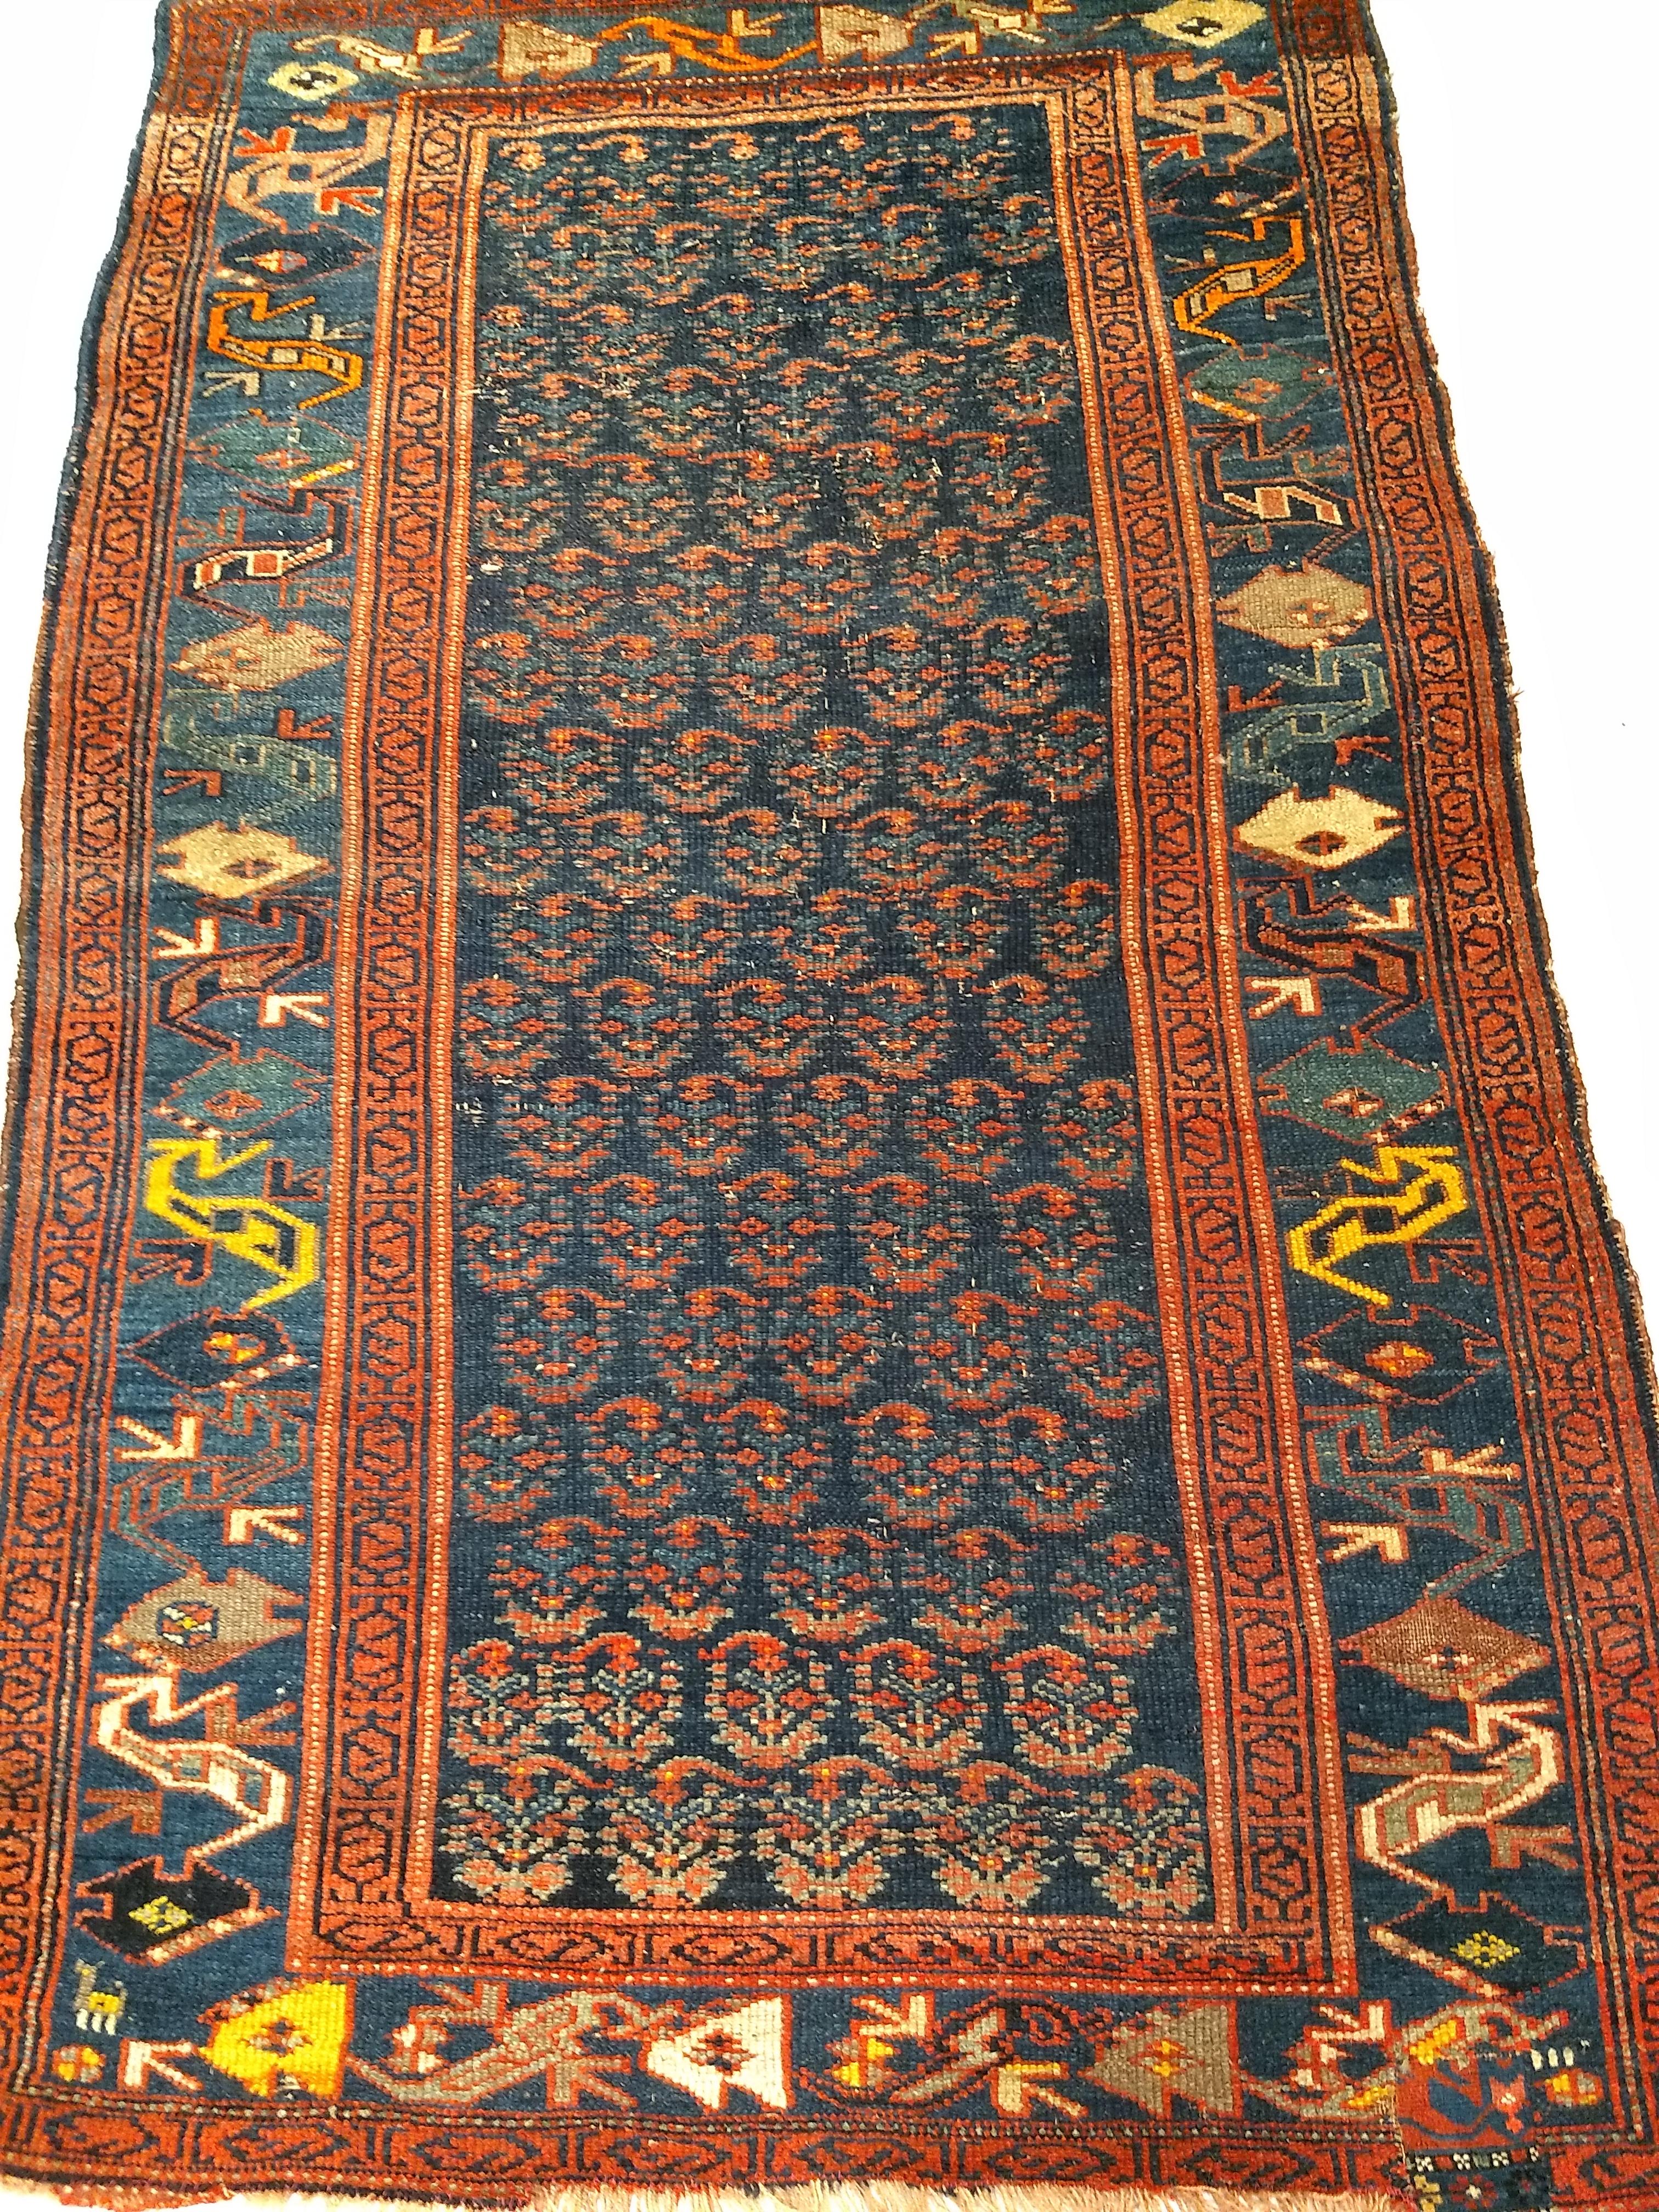 Vintage Persian Bidjar Area Rug in Allover Paisley in Navy Blue, Green, Yellow For Sale 4